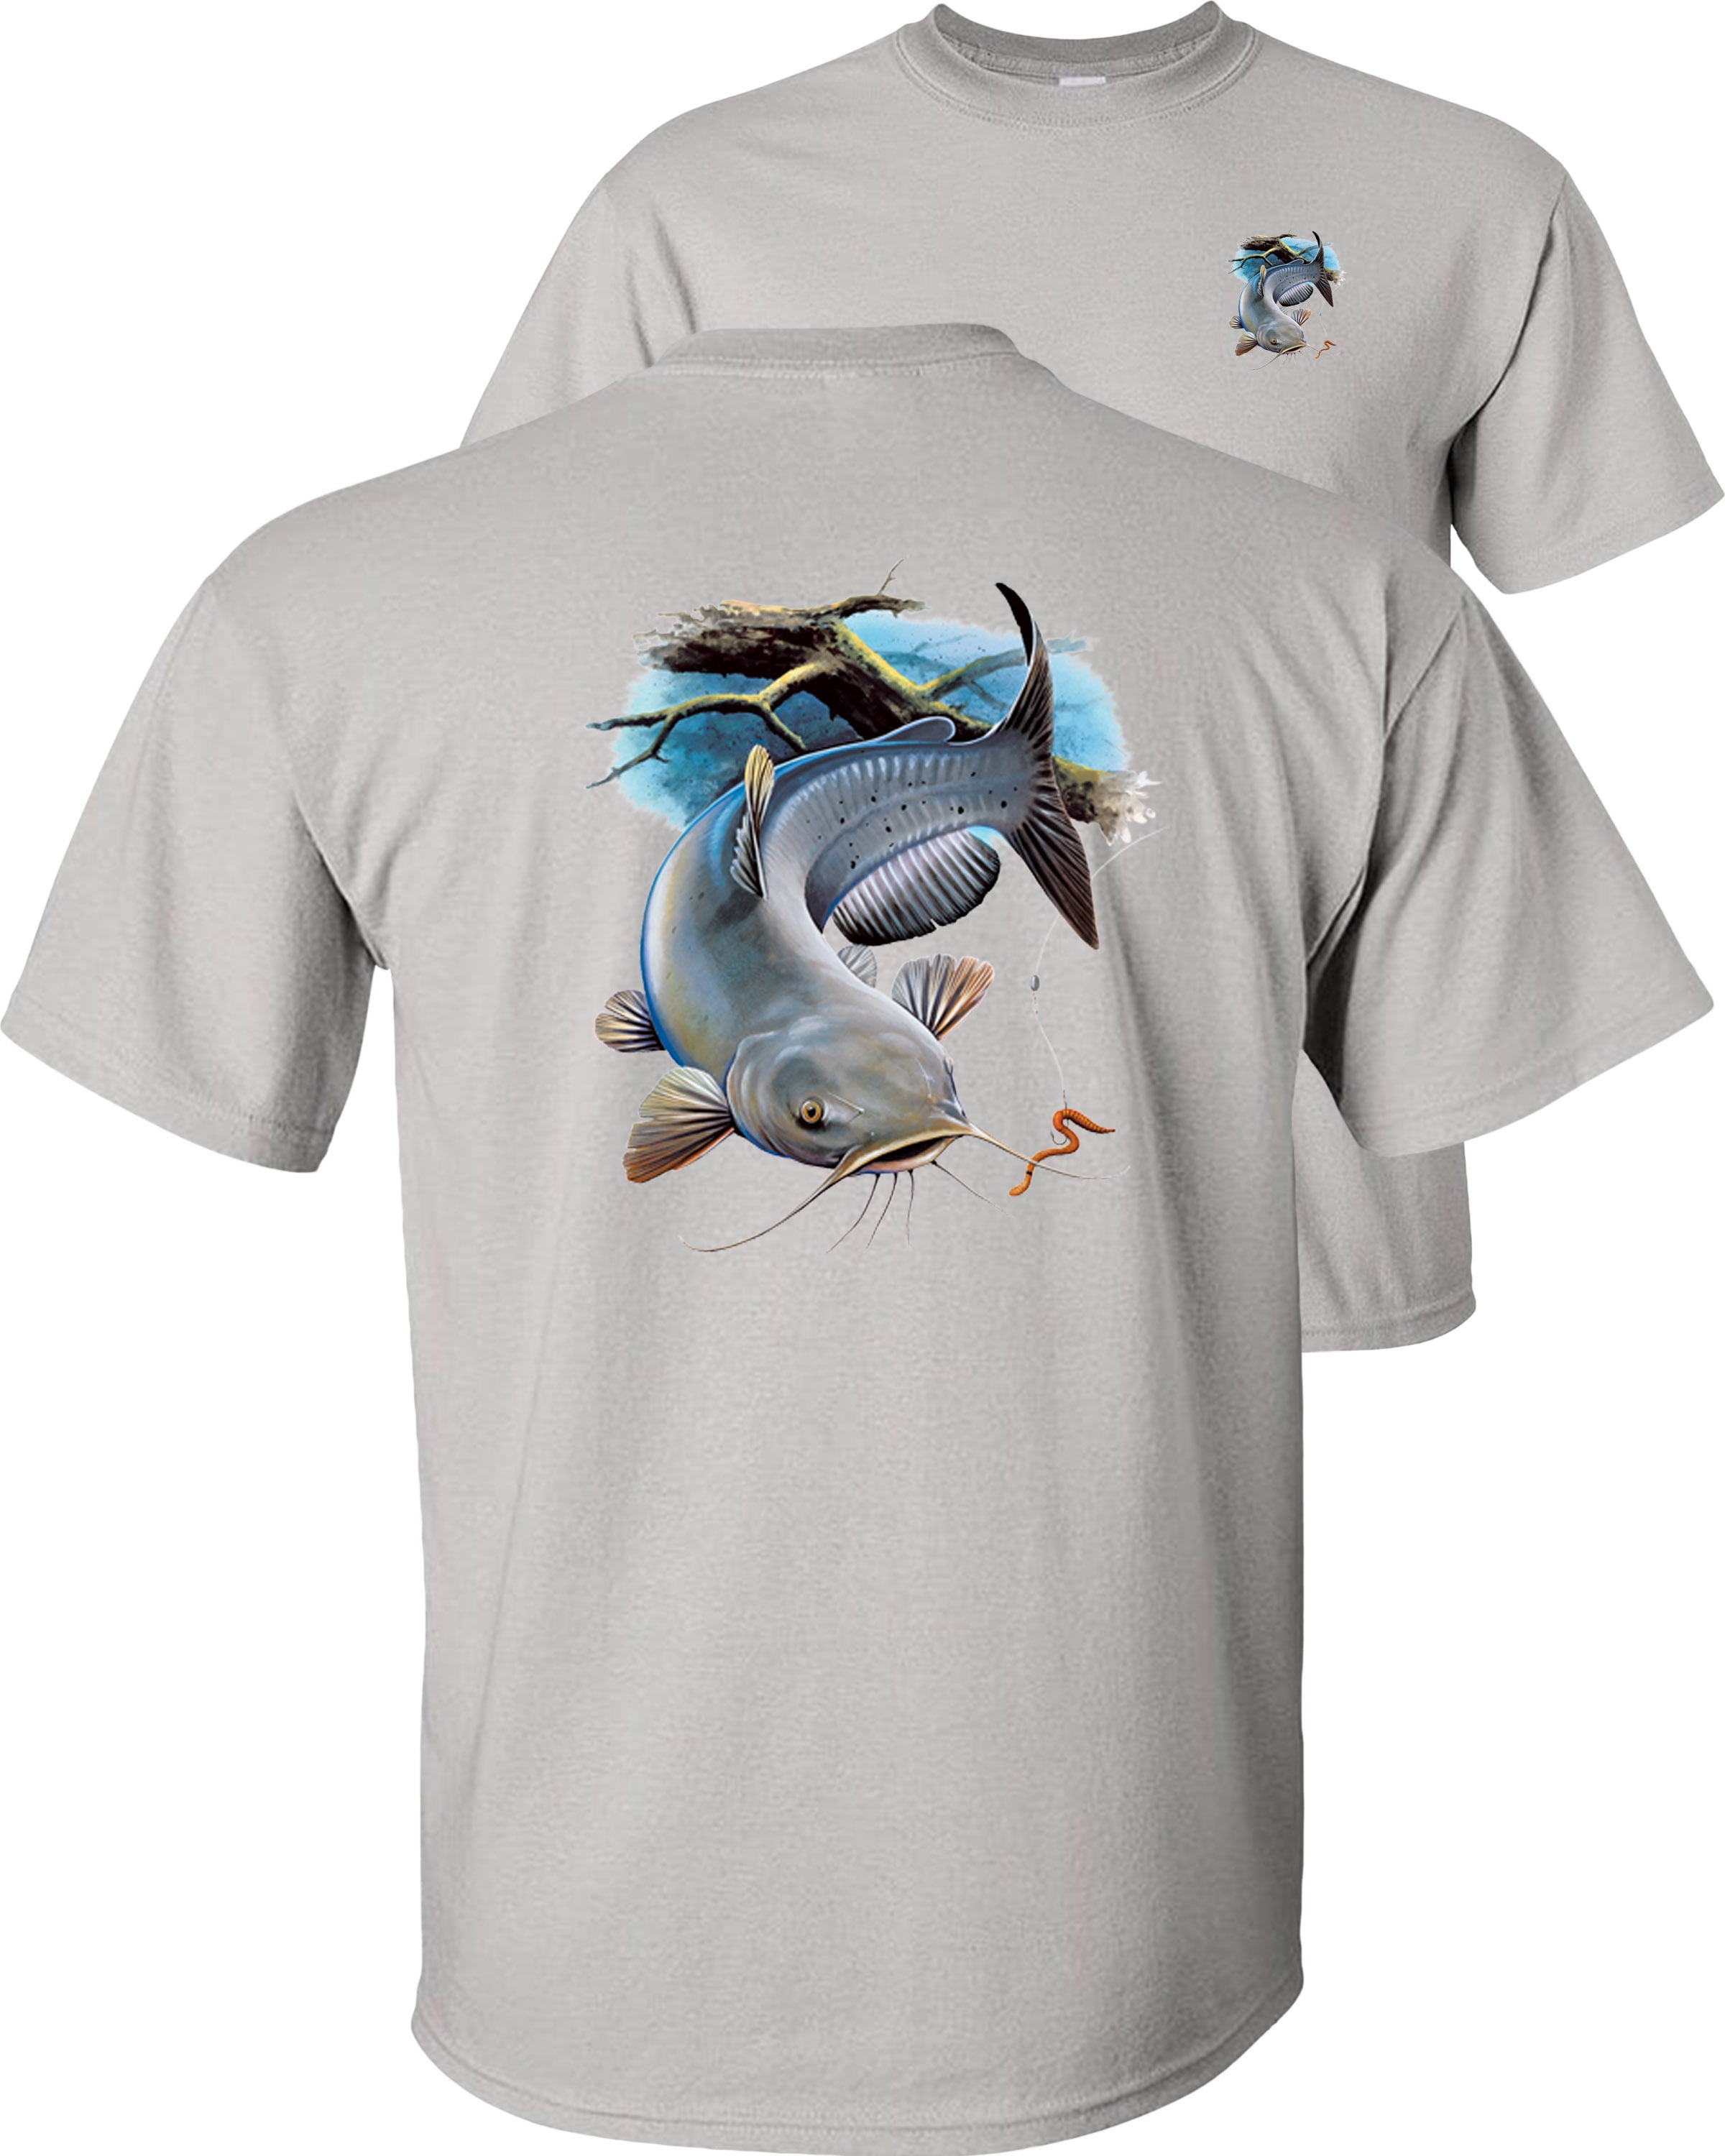 Fair Game Catfish T-Shirt, River Blue Channel, Fishing Graphic Tee-Ice  Grey-M